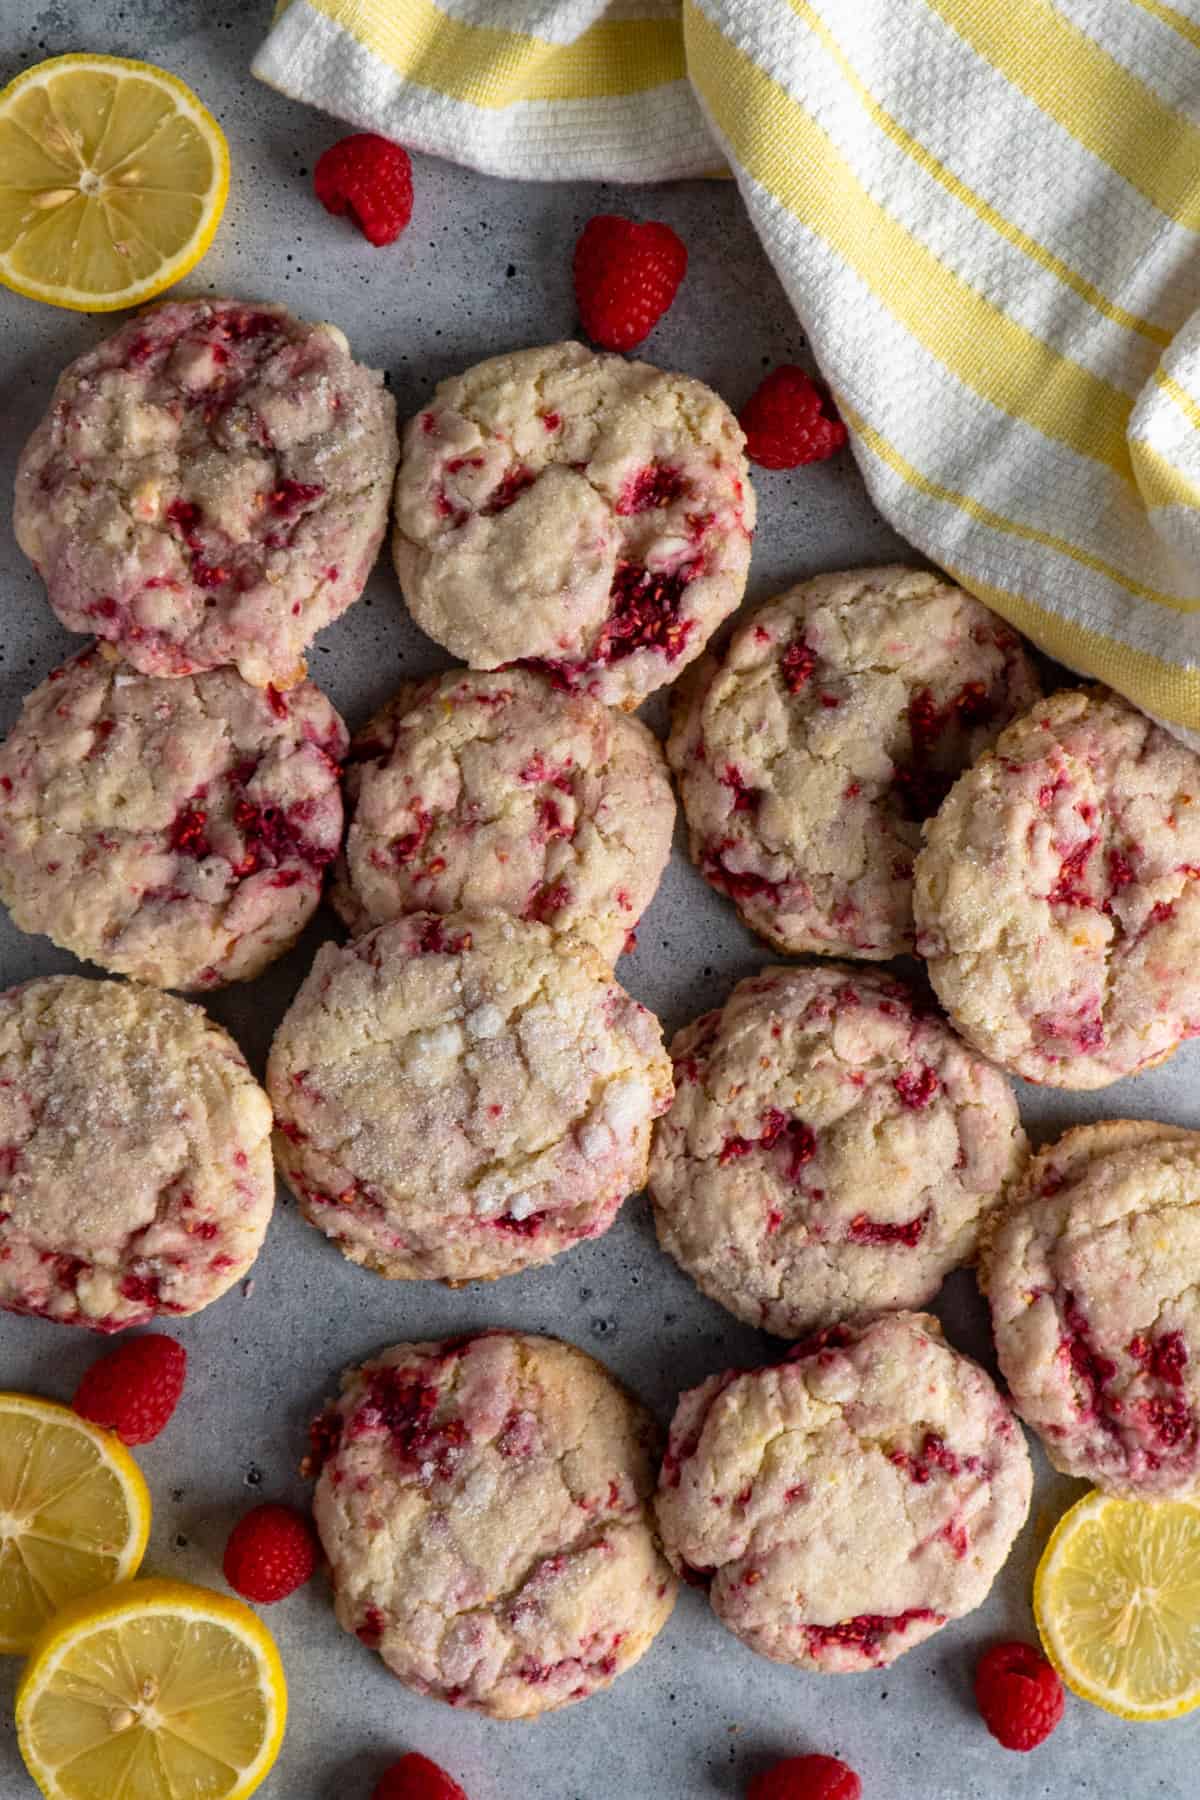 Raspberry lemonade cookies spread out on a concrete background.